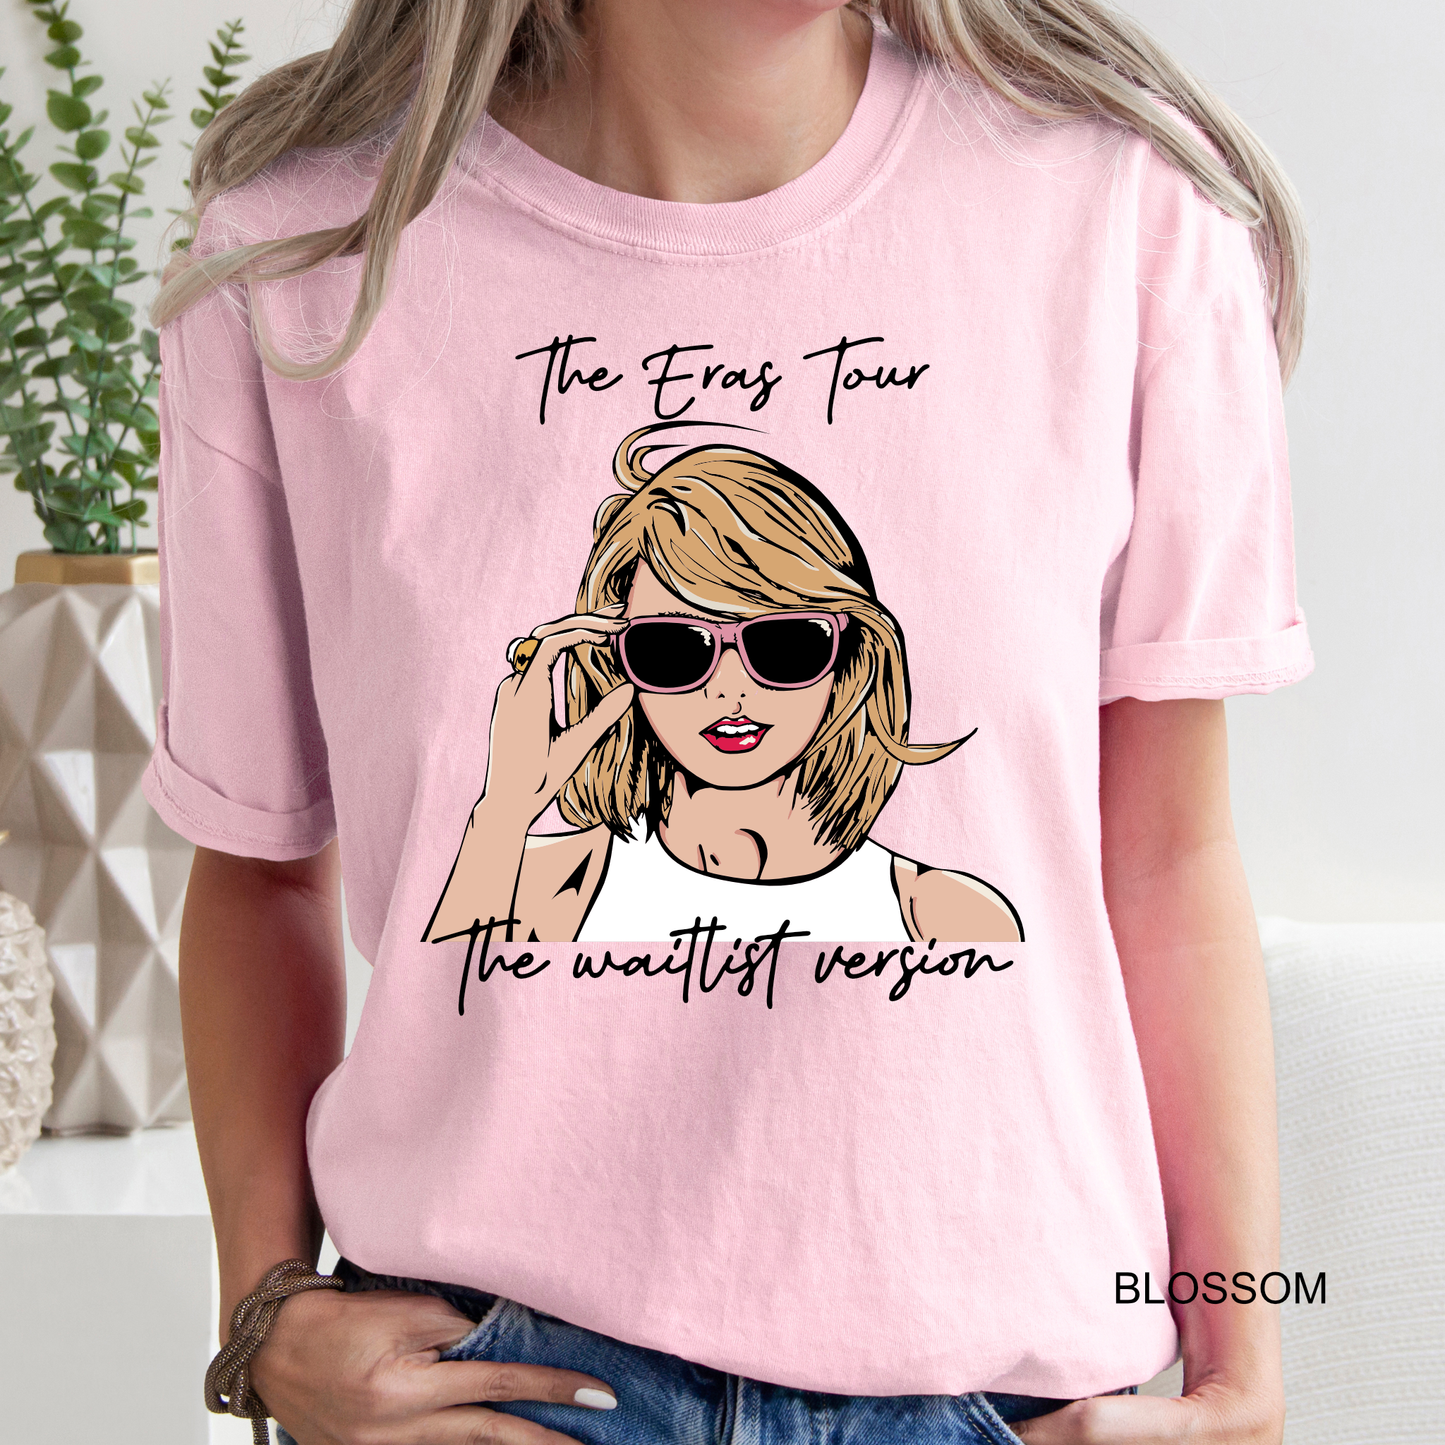 The Eras Tour - The Waitlist Version - Adult & Youth Comfort Colors Concert Tee